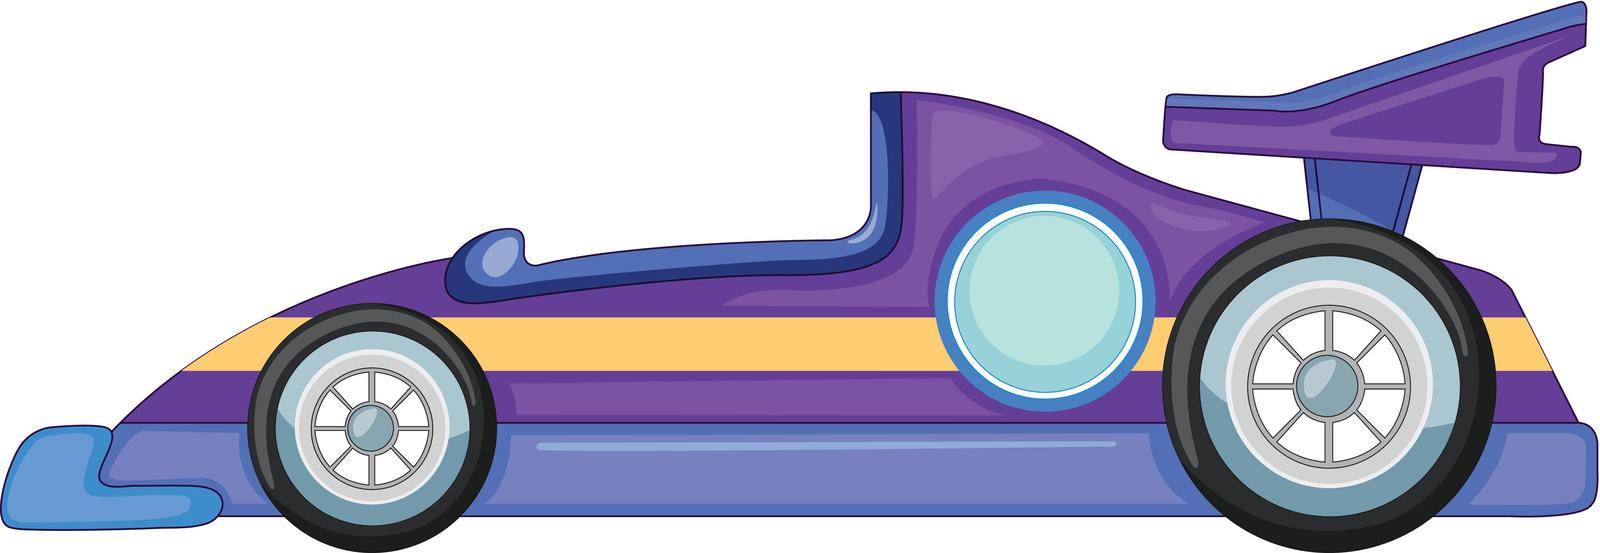 illustration of purple car on a white background